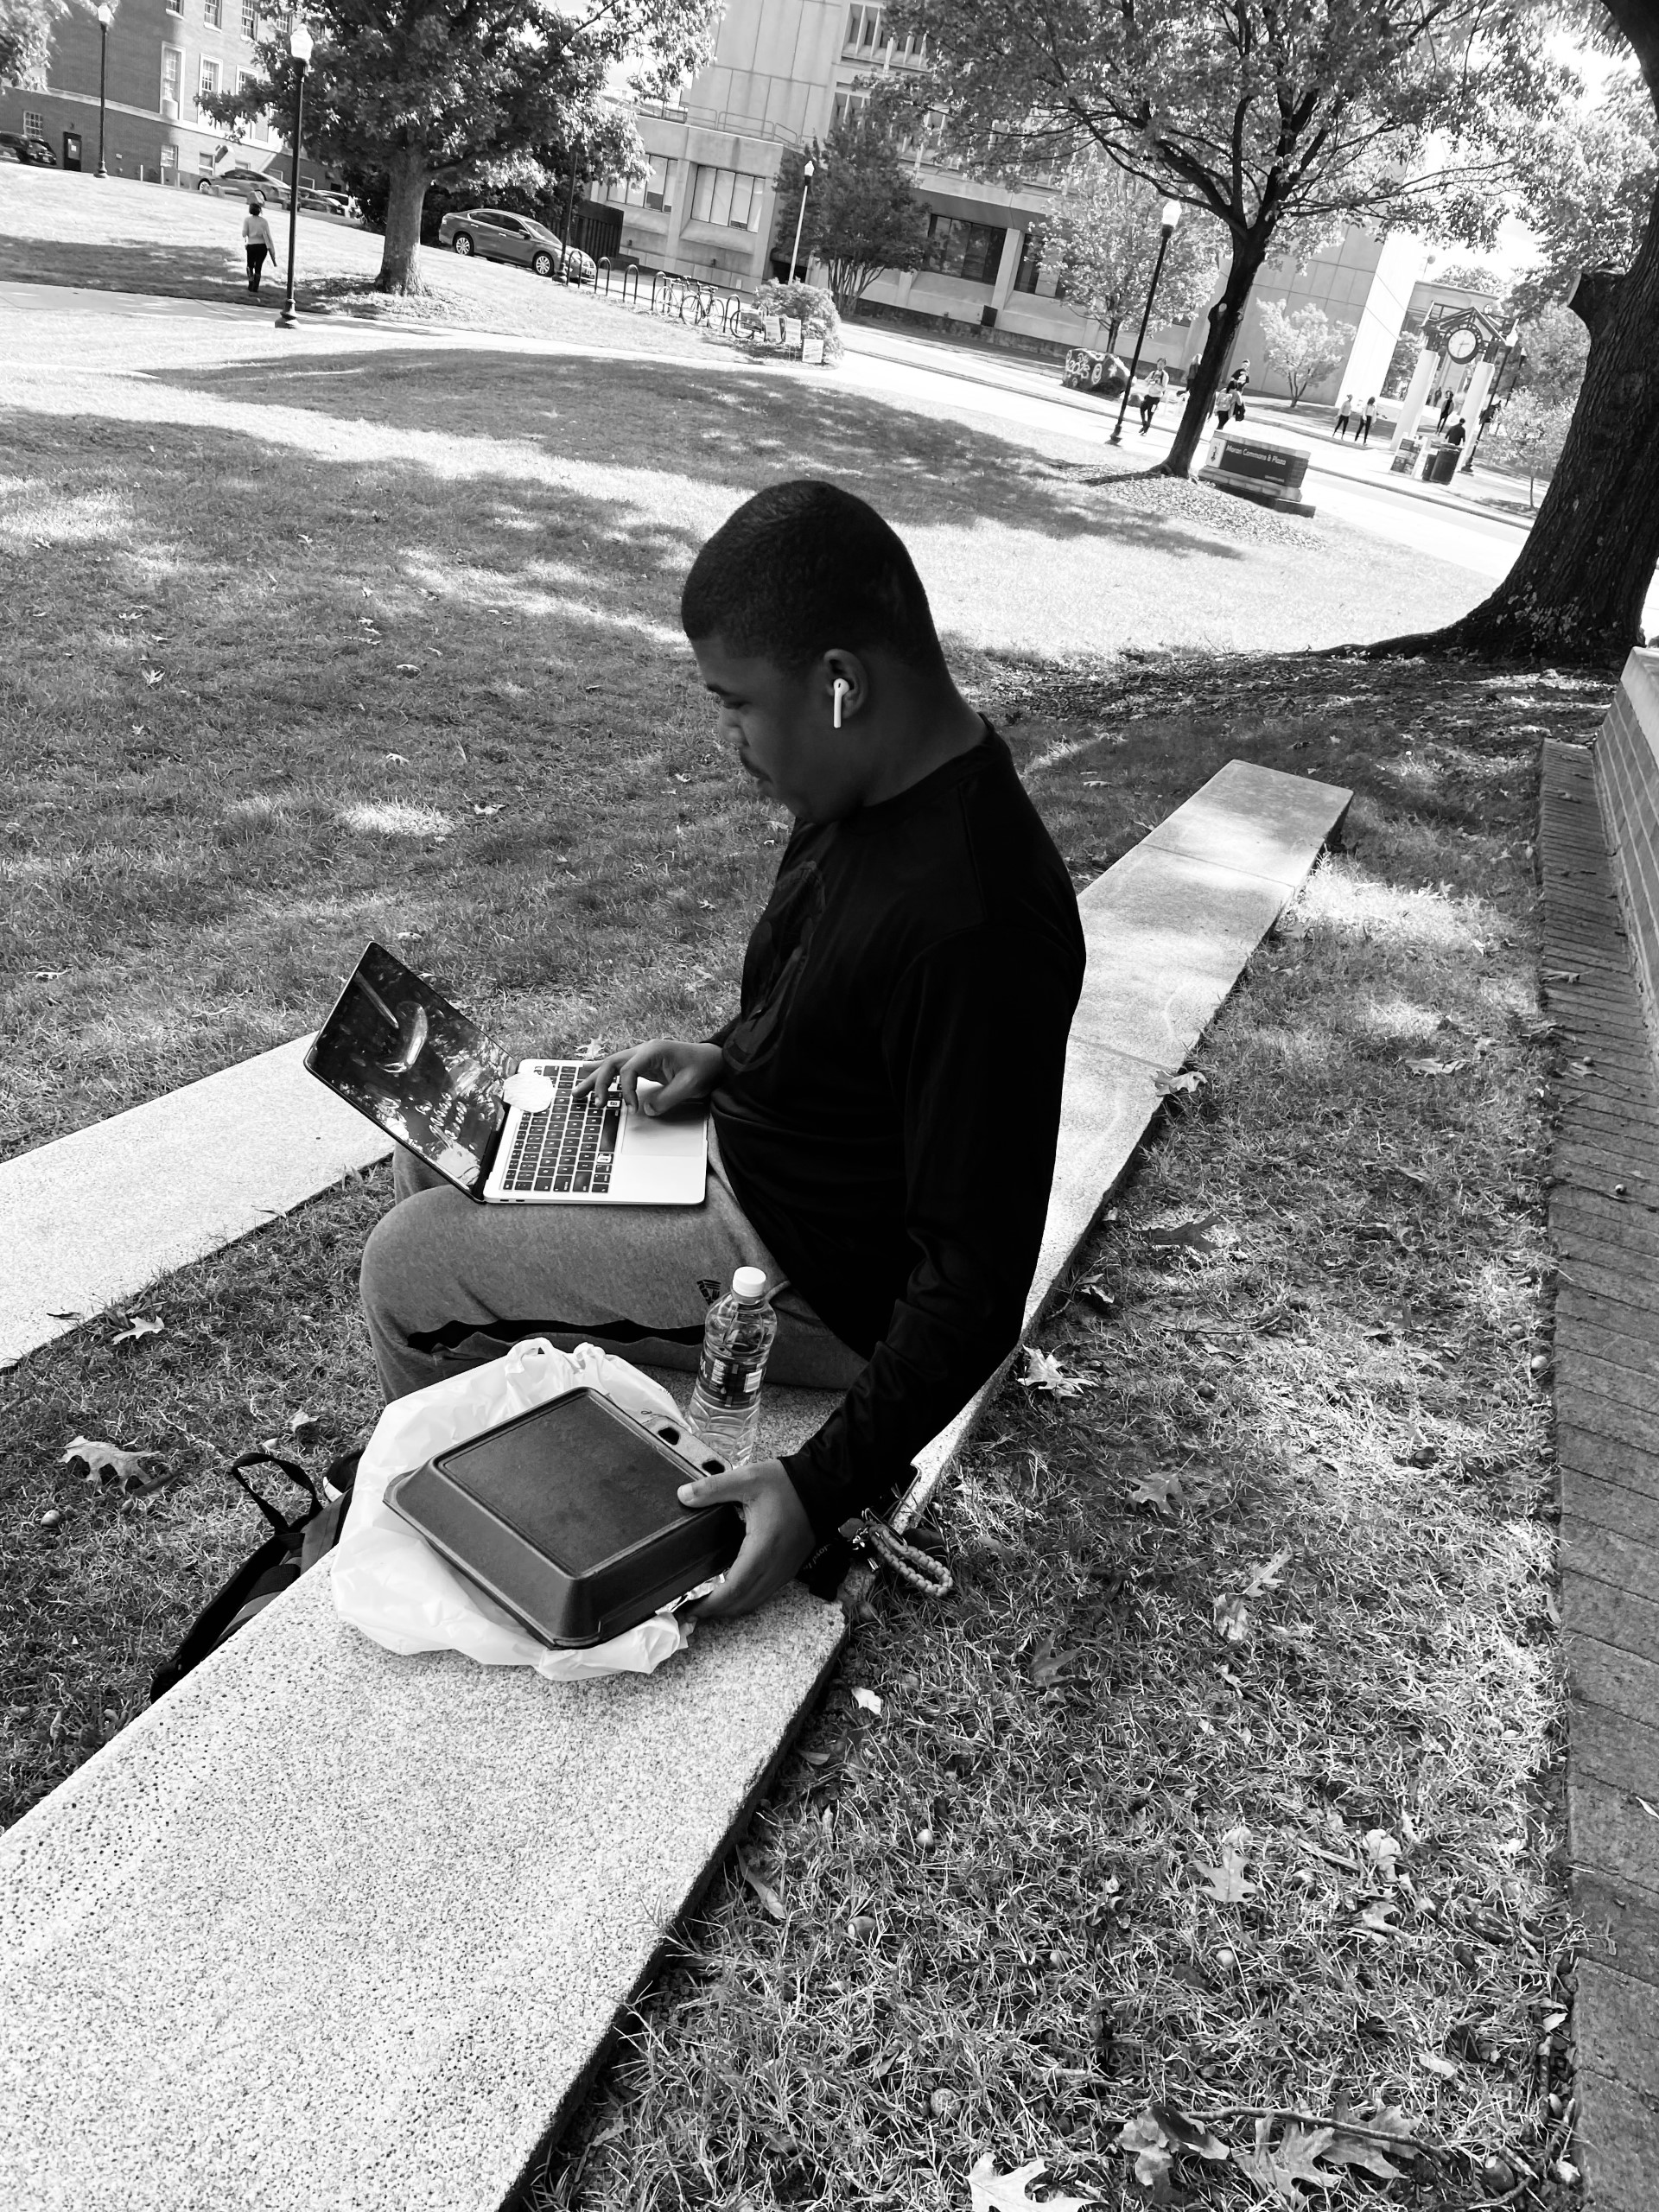 A UNCG student eats lunch outside and works on his laptop.